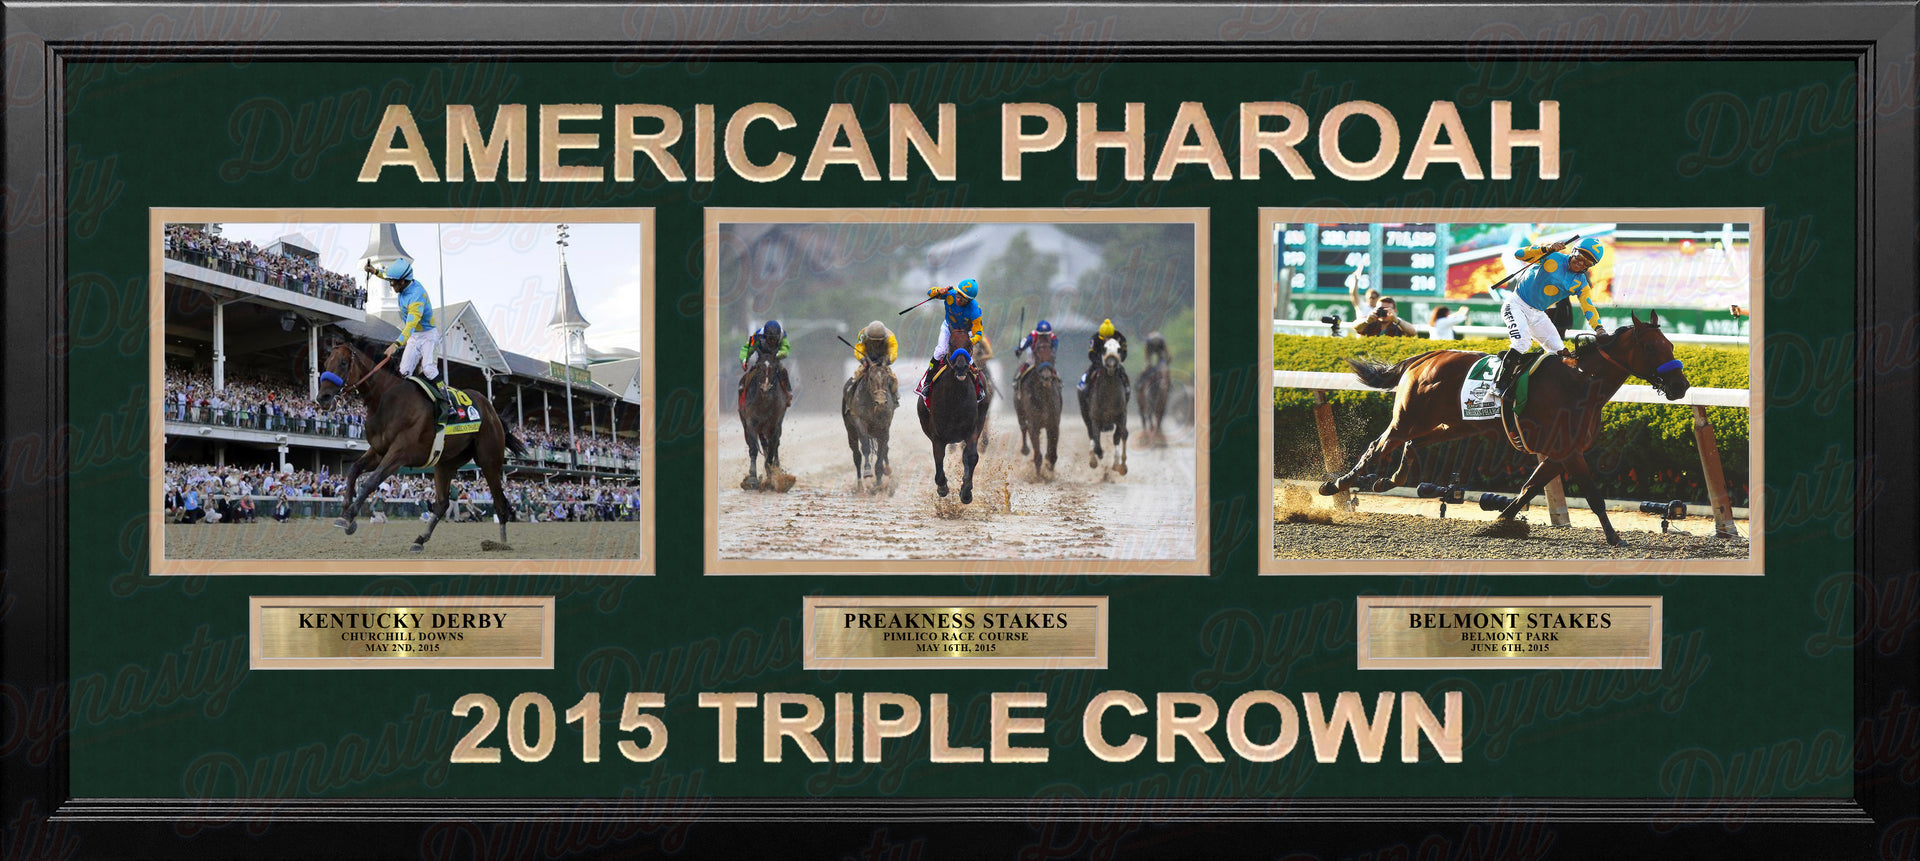 Victor Espinoza & American Pharoah 2015 Triple Crown Winner Framed and Matted Horse Racing Collage - Dynasty Sports & Framing 